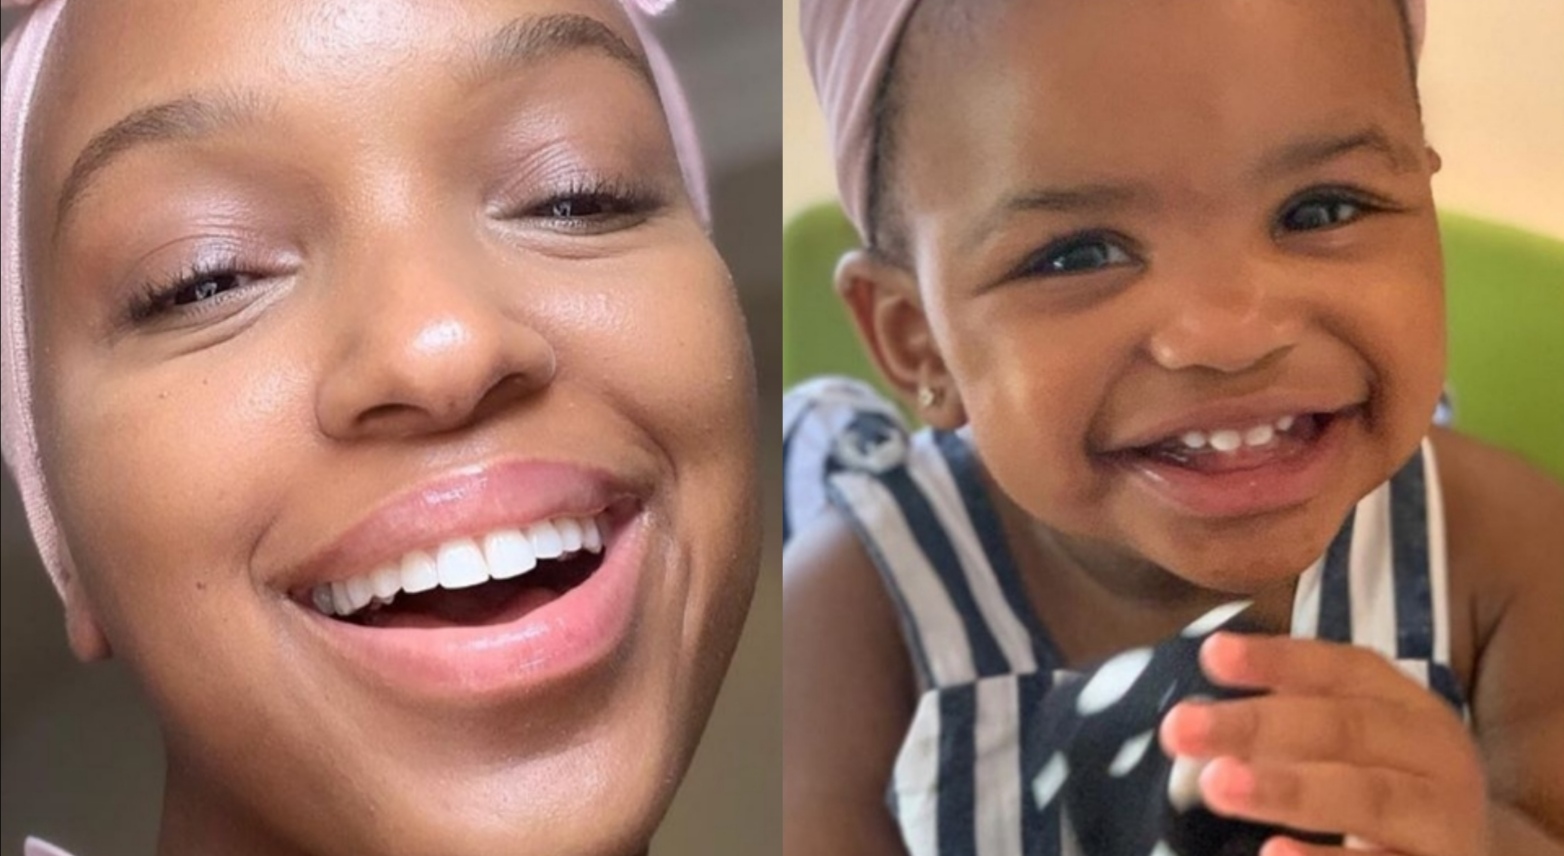 Watch! Nandi Madida's Daughter Is Her Mini Me After Getting A Bald Haircut